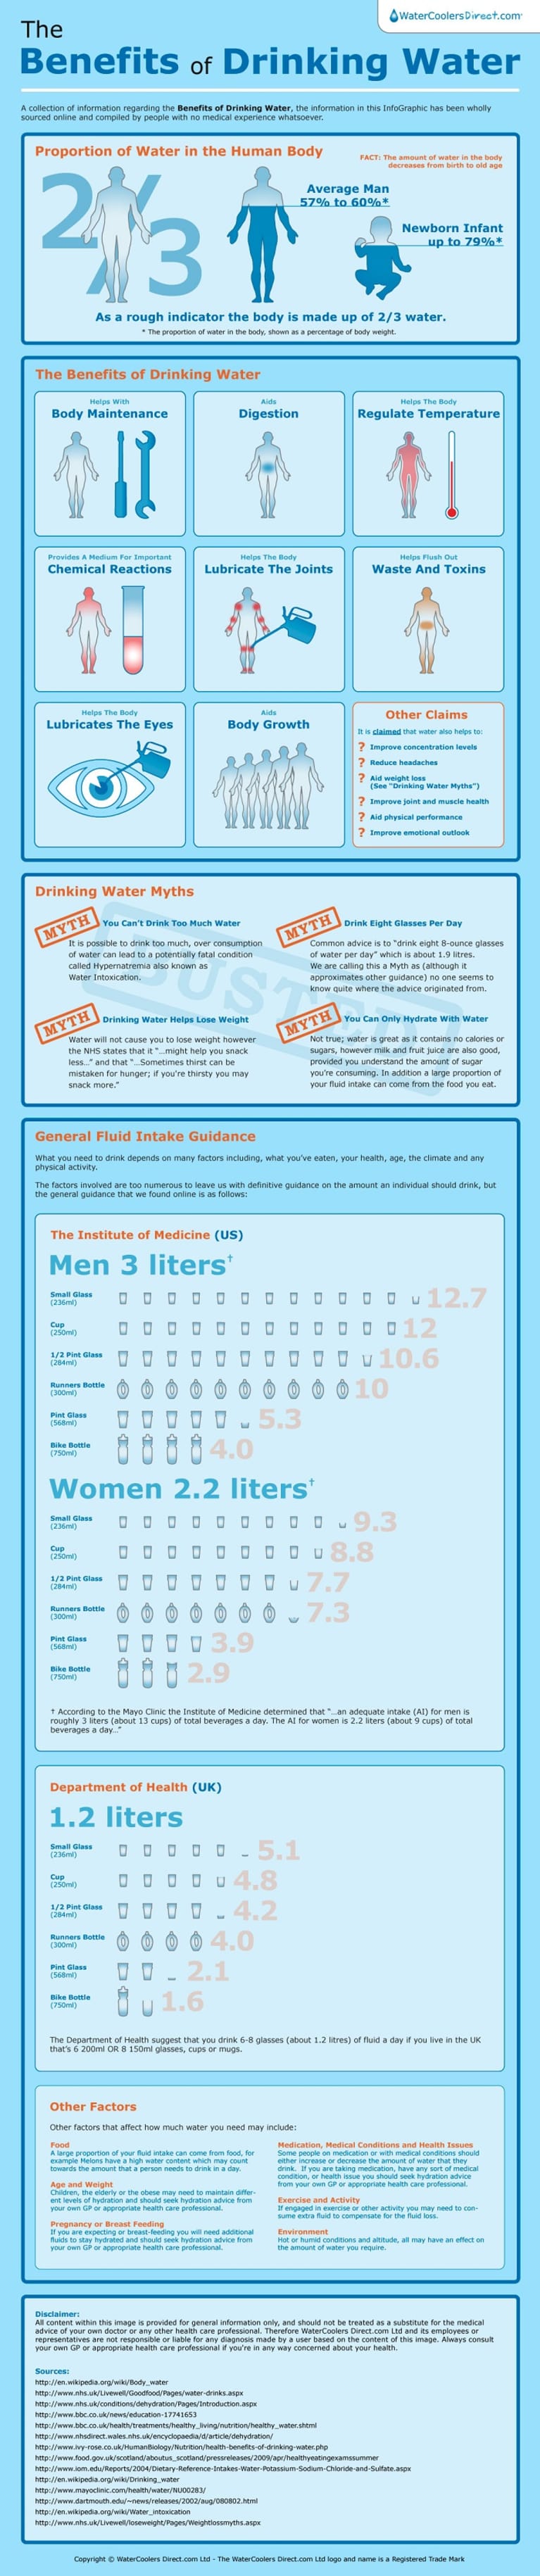 The Benefits of Drinking Water (Infographic)